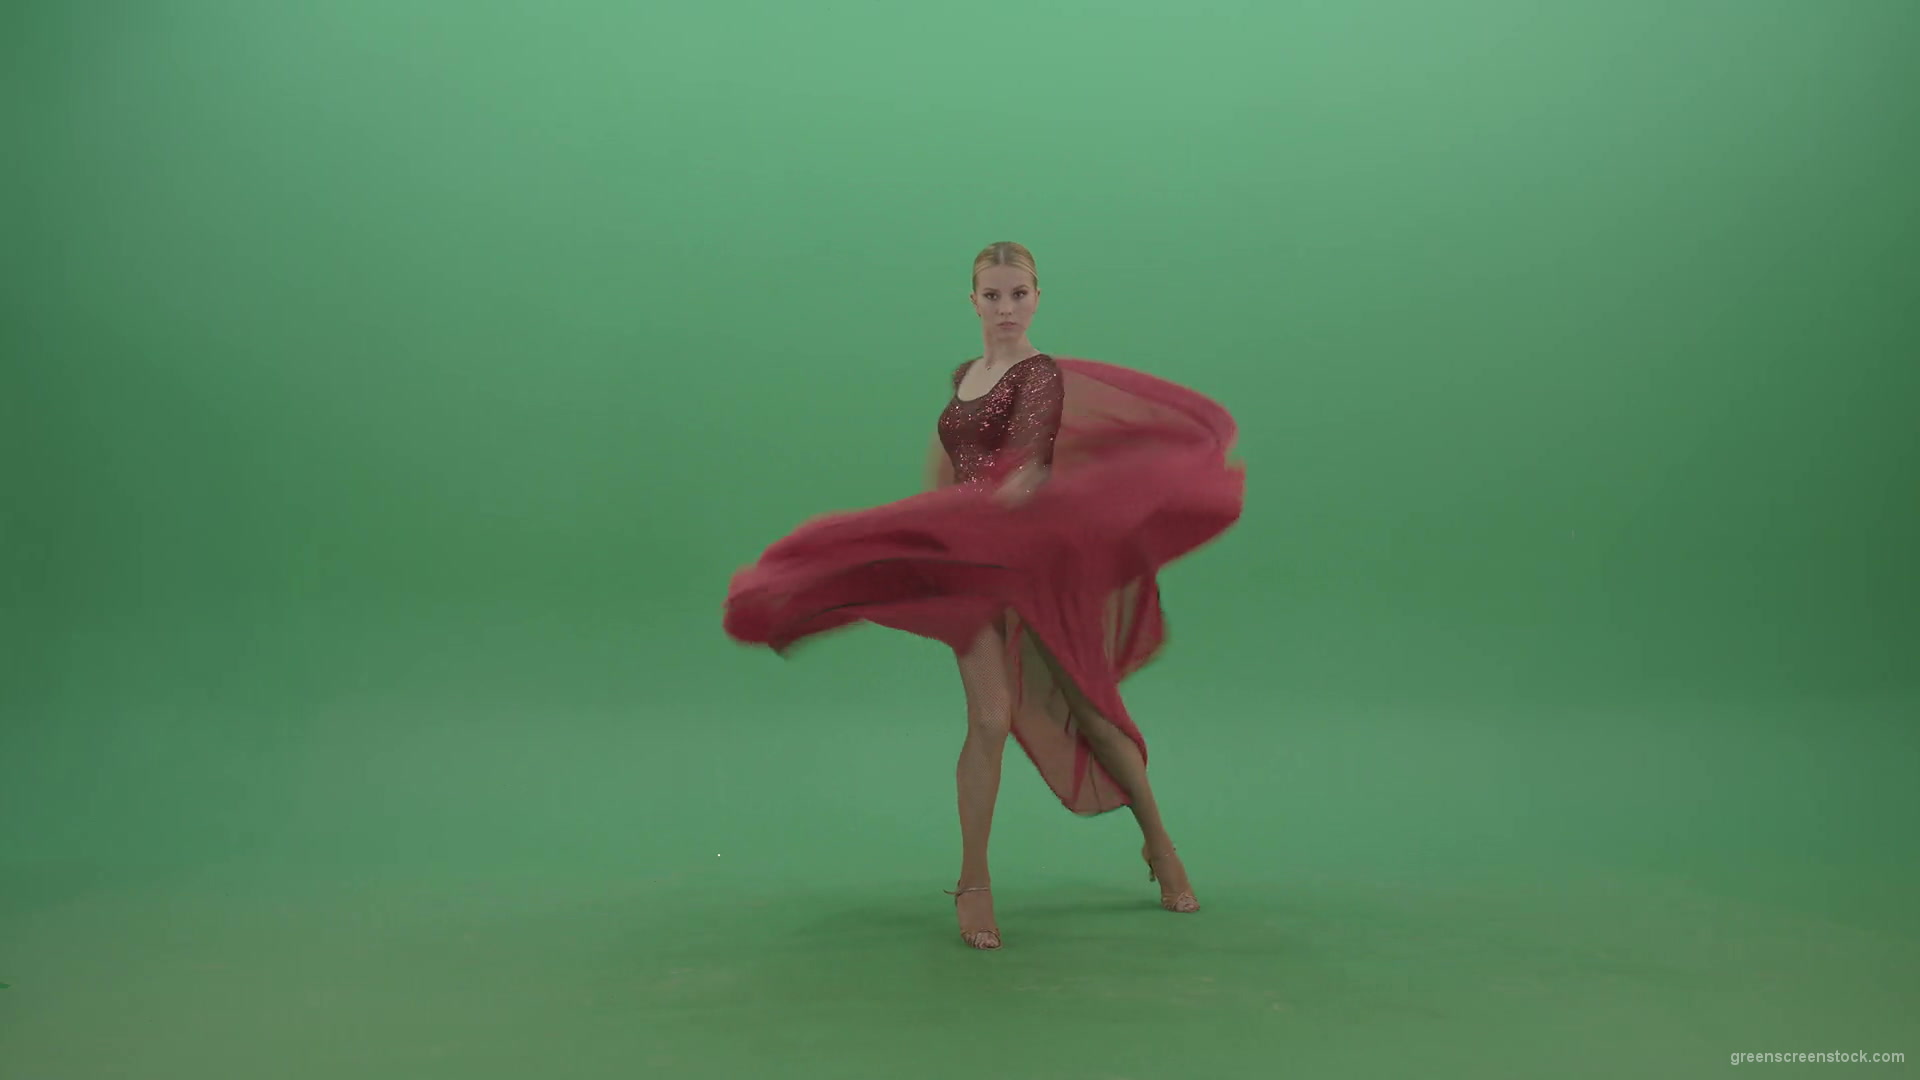 Passion-elegant-girl-in-red-dress-dancing-flamenco-isolated-on-green-screen-4K-Video-Footage-1920_002 Green Screen Stock